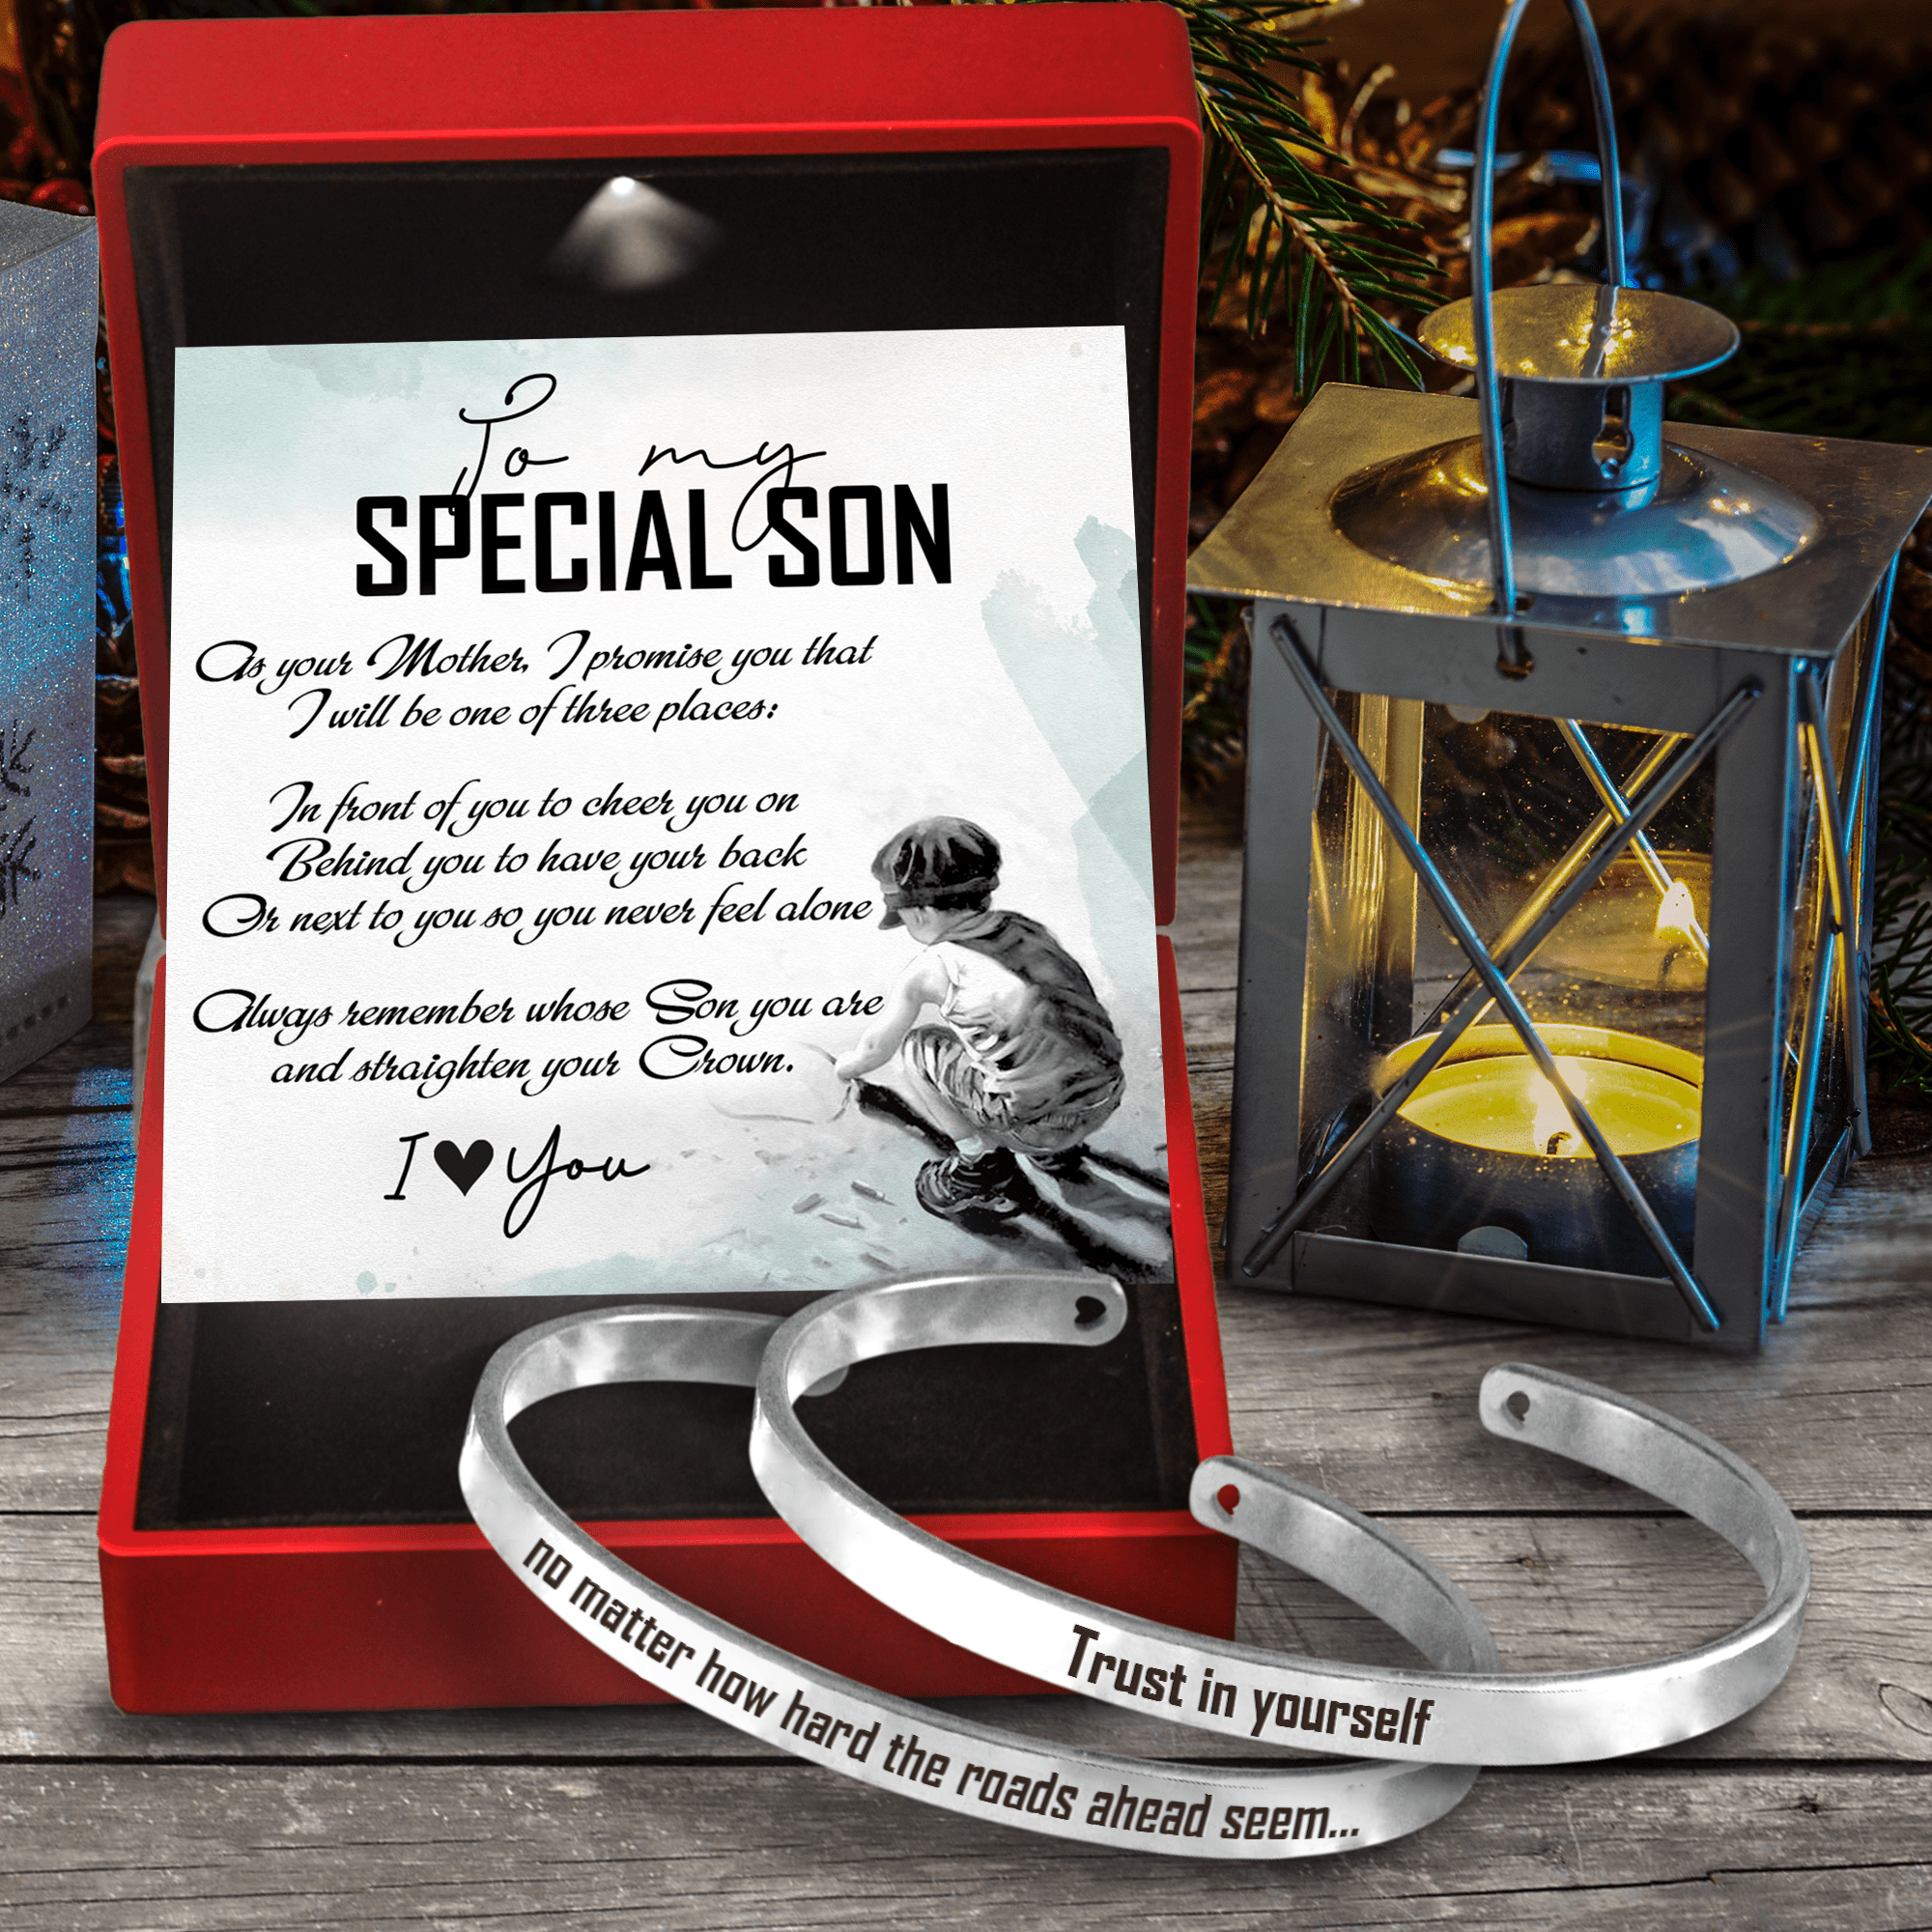 Son’s Couple Bracelet - Family - To My Son - Always Remember Whose Son You Are And Straighten Your Crown - Gbt16009